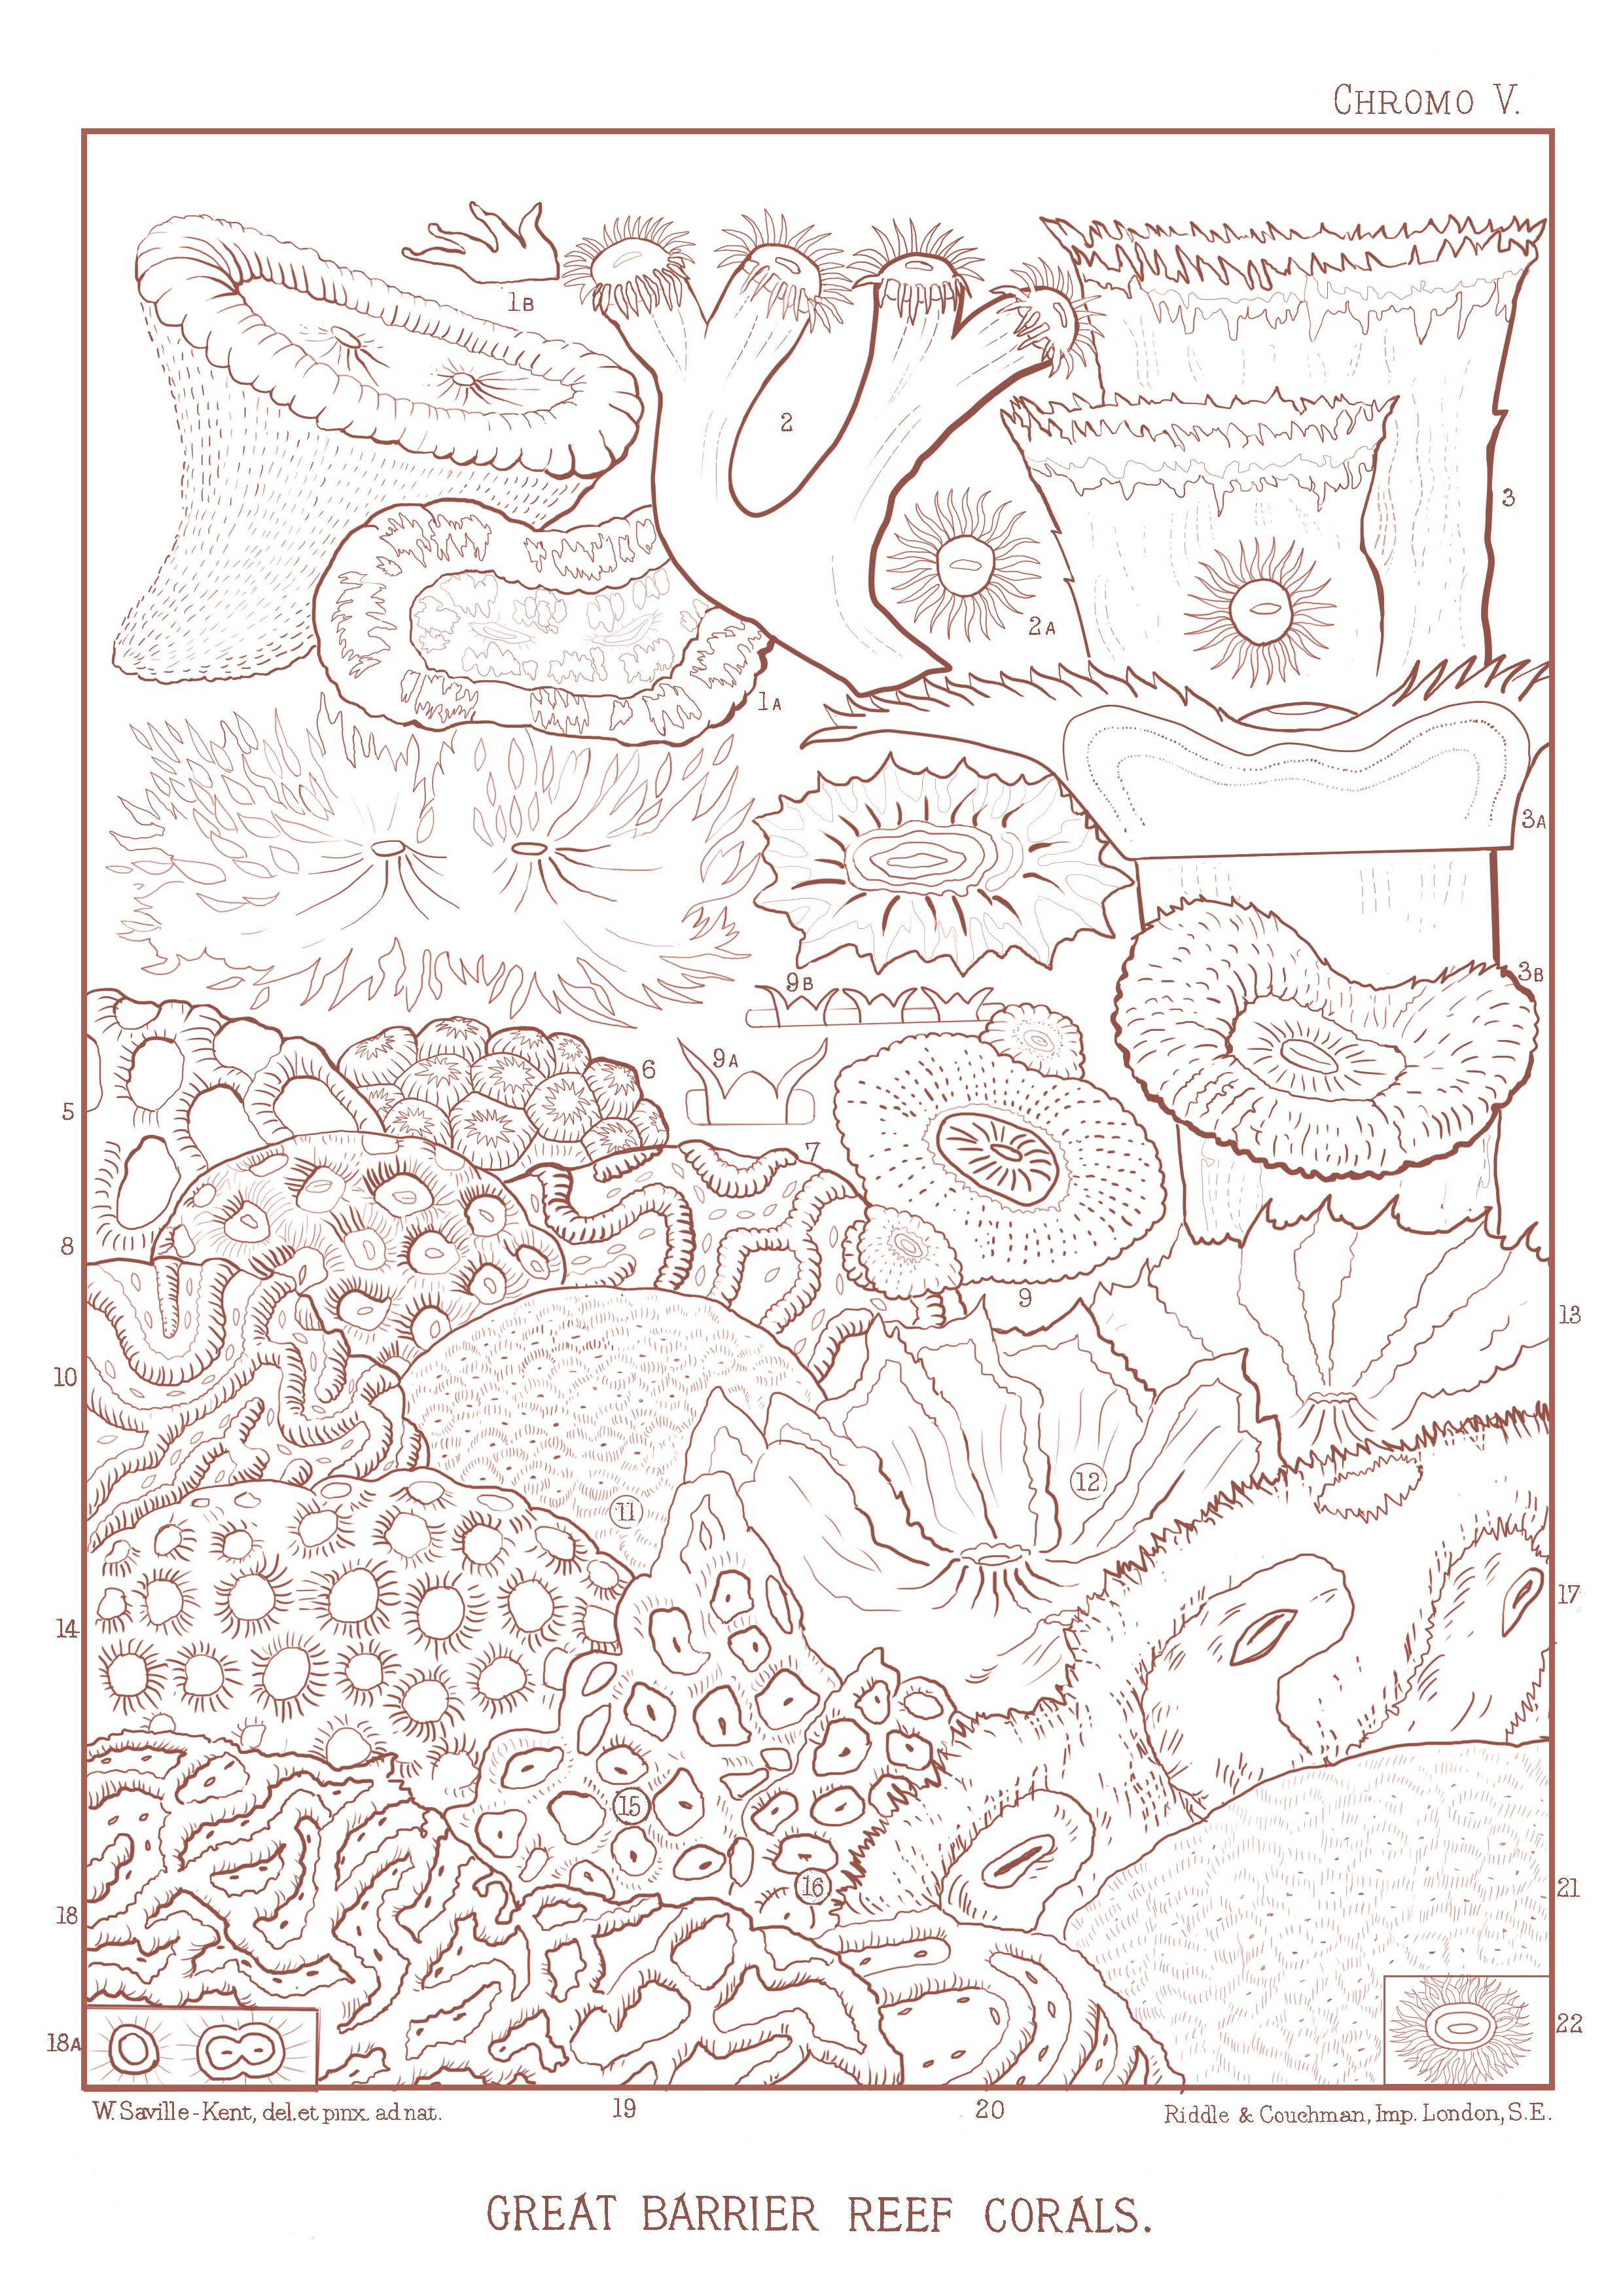 Drawing of Great Barrier Reef Corals